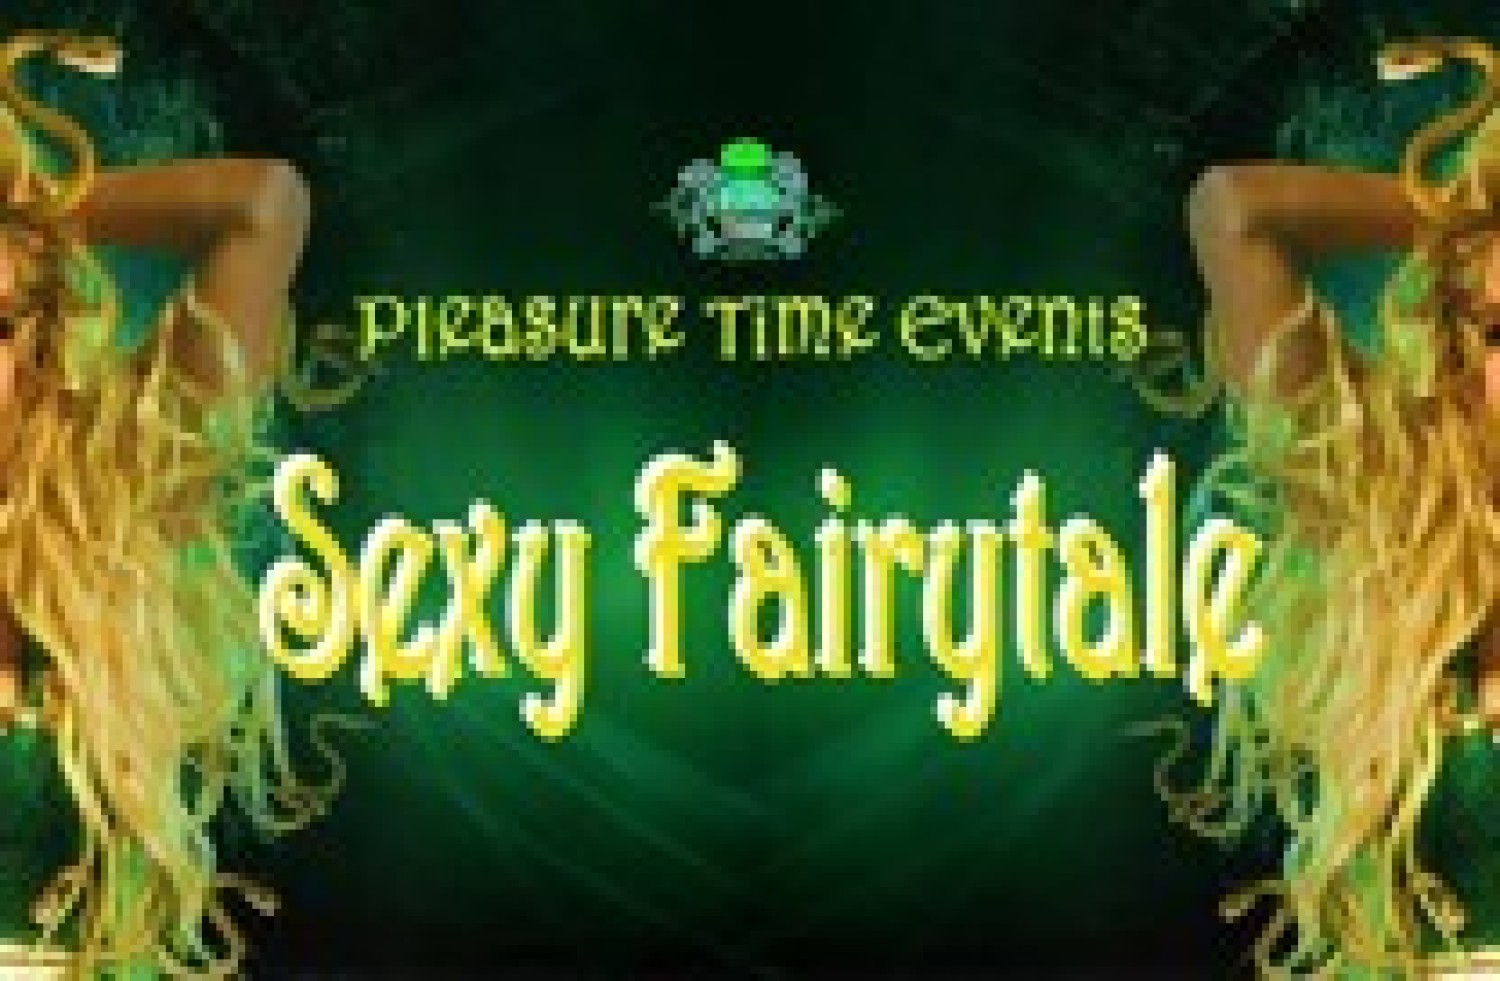 Party report: Pleasure Time presents Sexy Fairytale, Maastricht (01-04-2017)